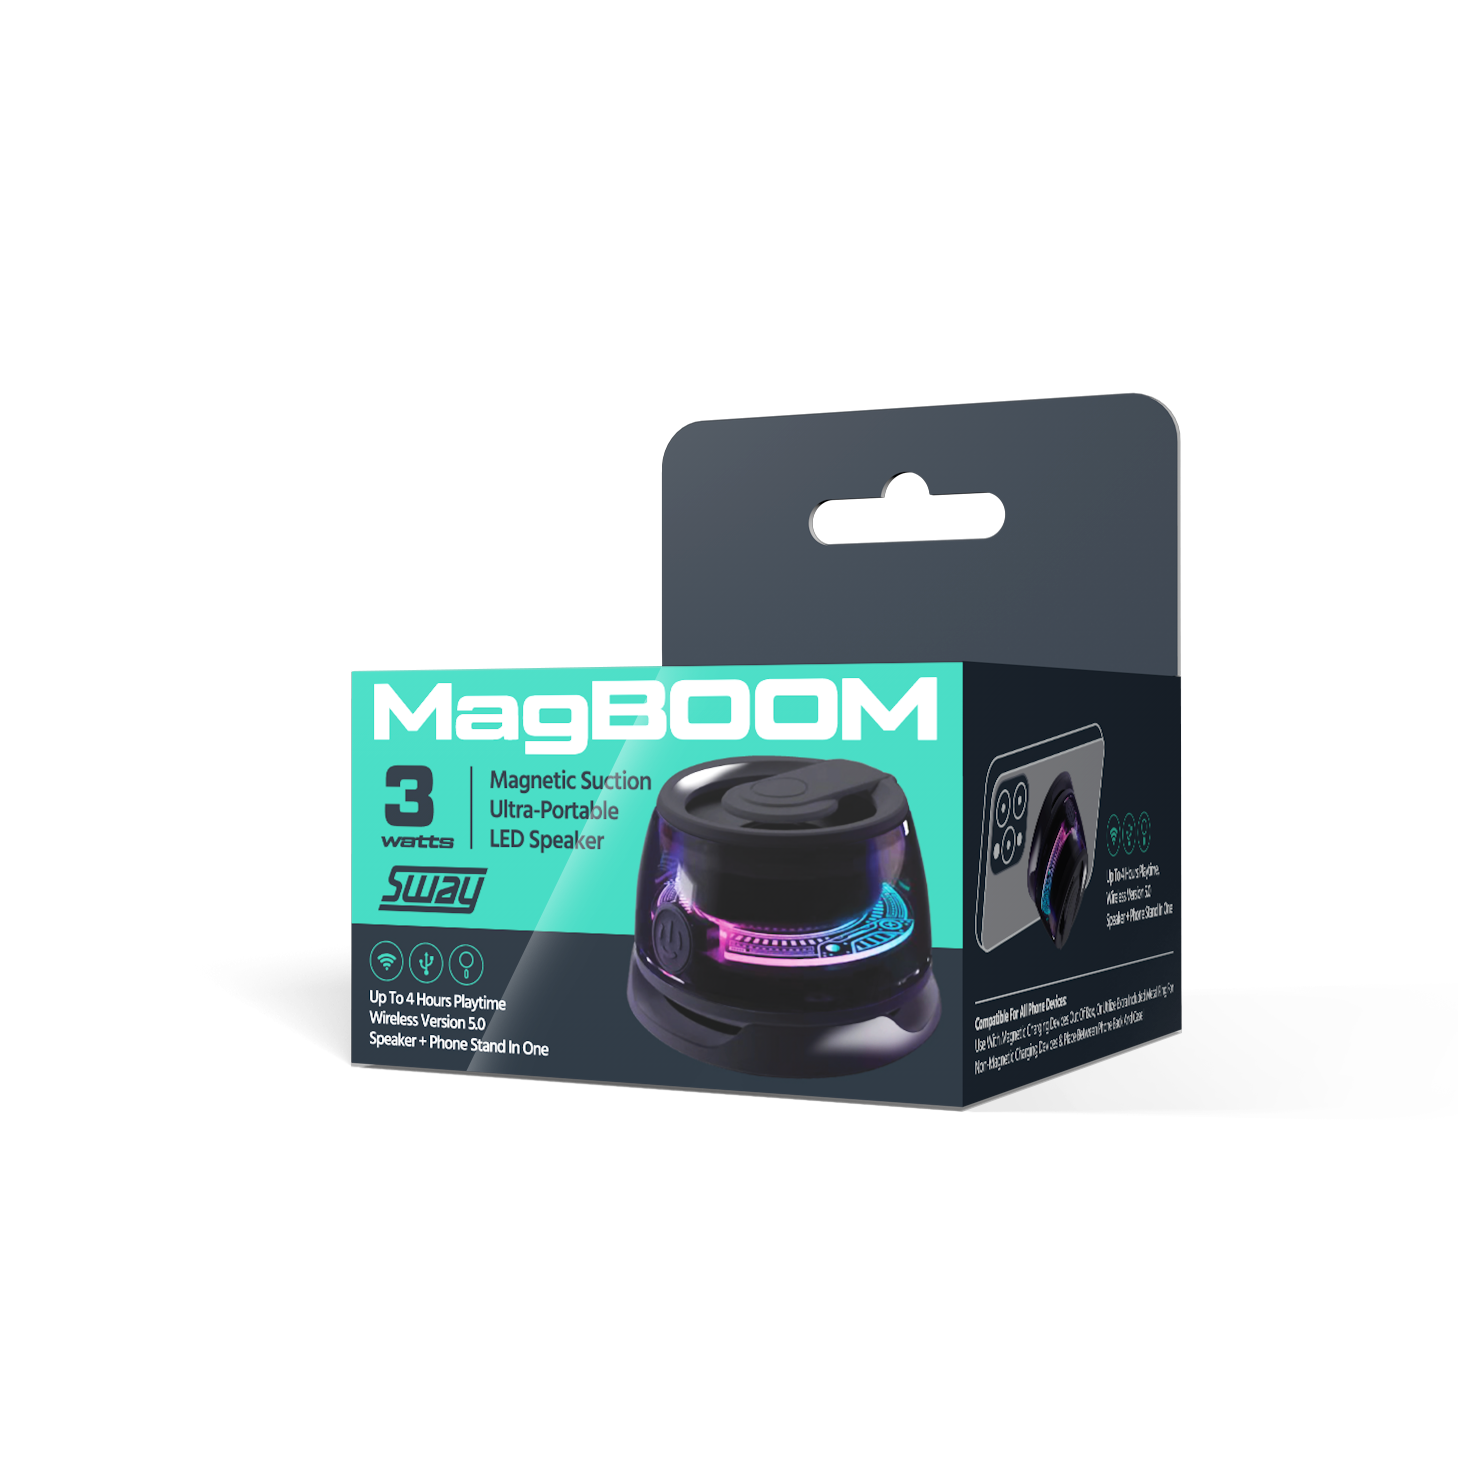 MagBOOM LED | MagSafe Magnetic Suction Portable Speaker + Phone Stand | 3 Watts